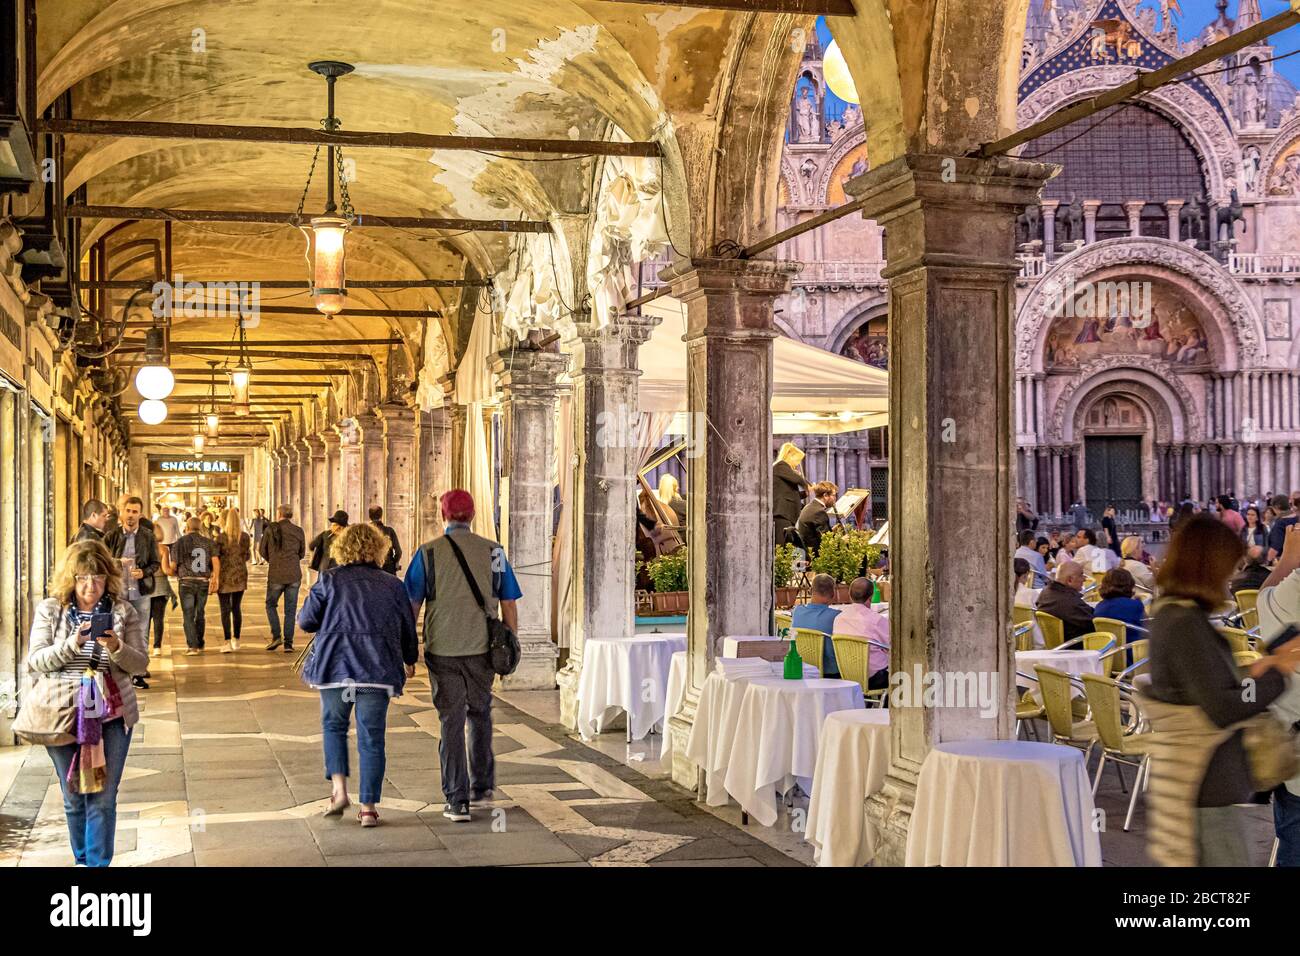 People walking past Caffe Lavena enjoying an early evening stroll through the porticos and archways surrounding St Mark's Square ,Venice,Italy Stock Photo